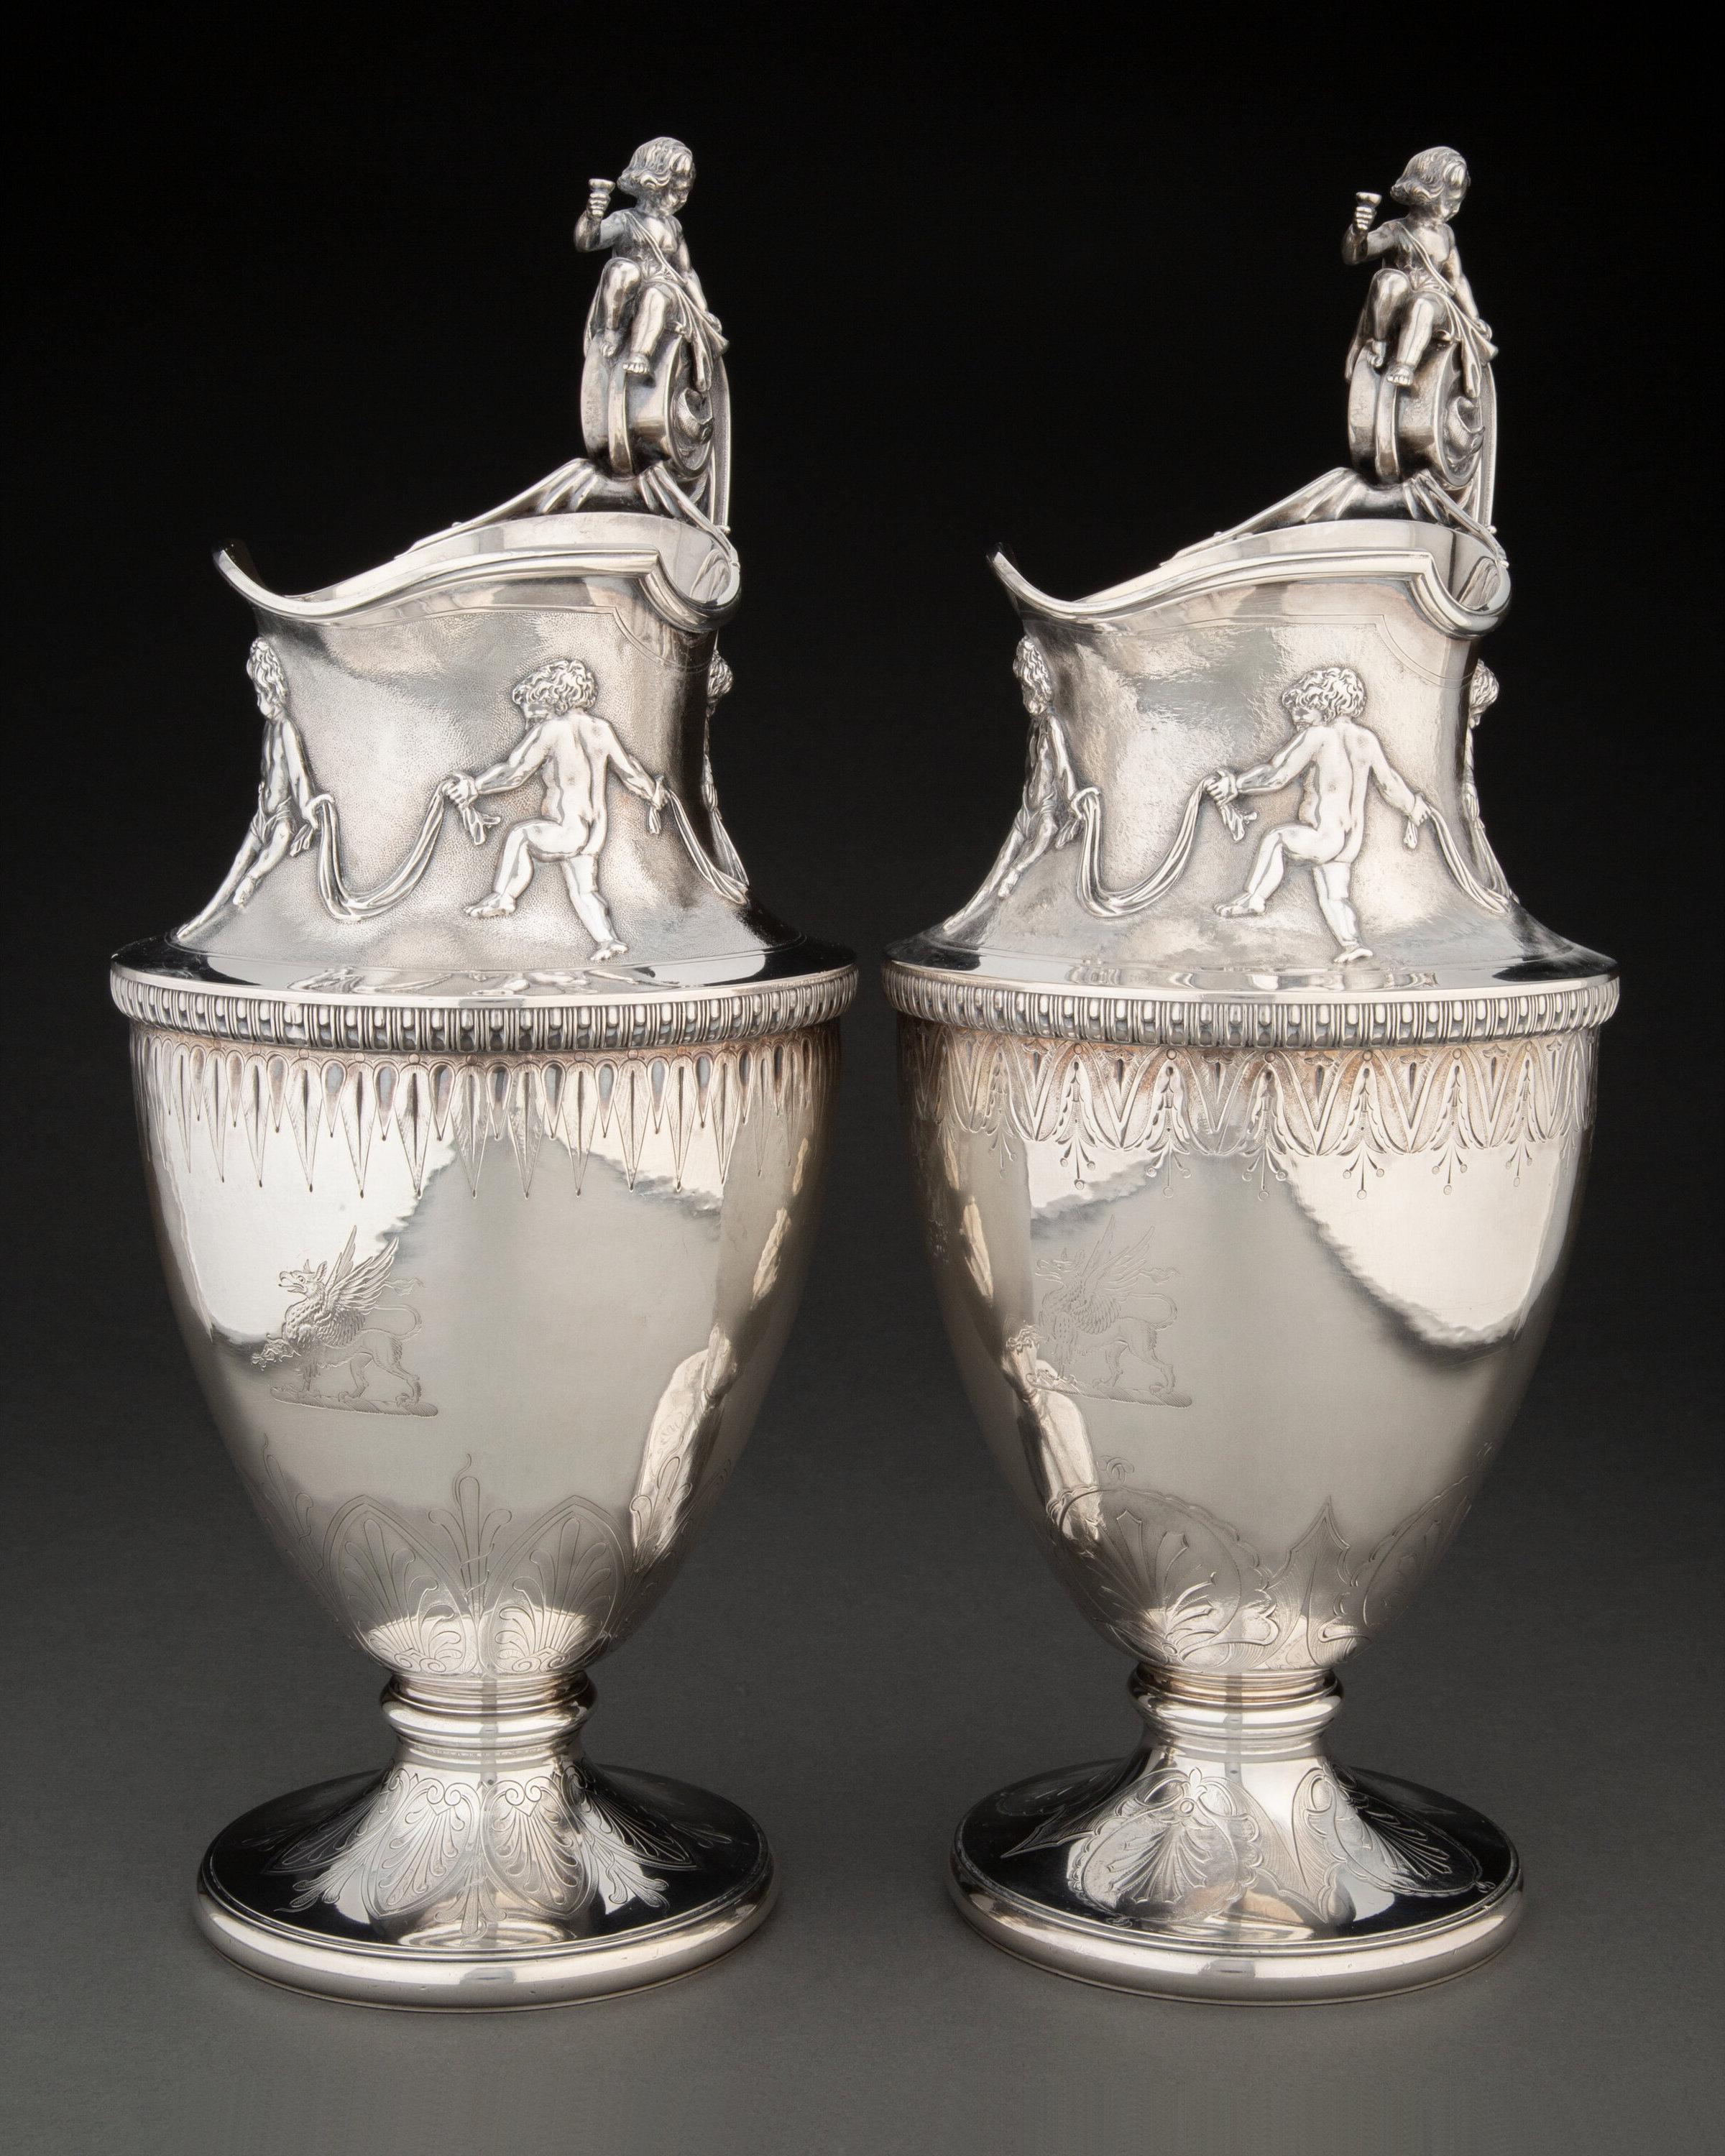 Neoclassical Revival Pair Neoclassical Silver Water Pitchers by Gorham